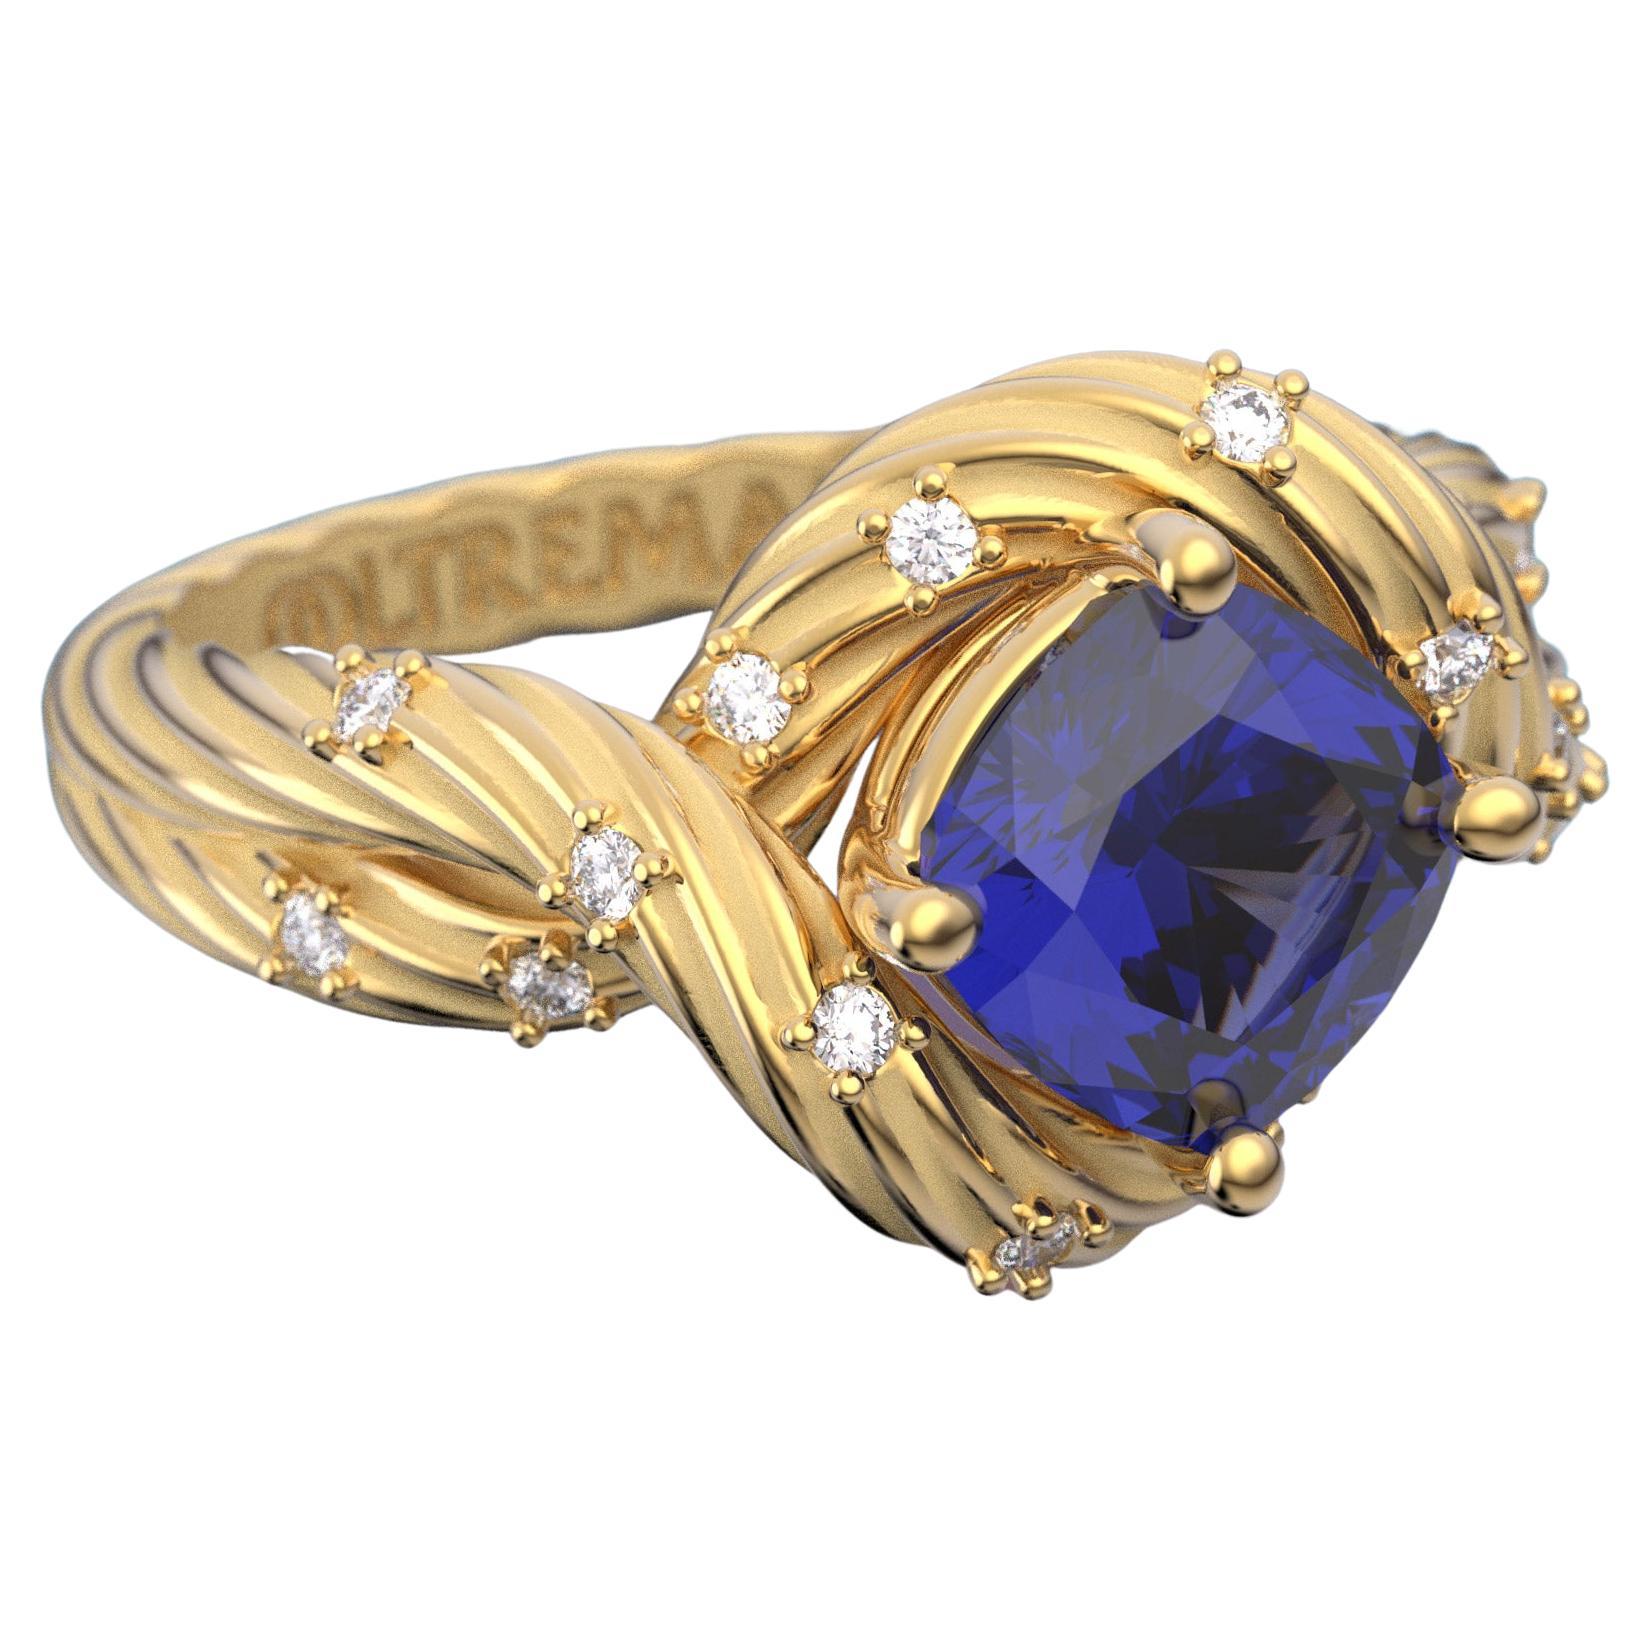 Tanzanite and Diamonds Ring 14k Solid Gold, Italian Fine Jewelry, made to order.